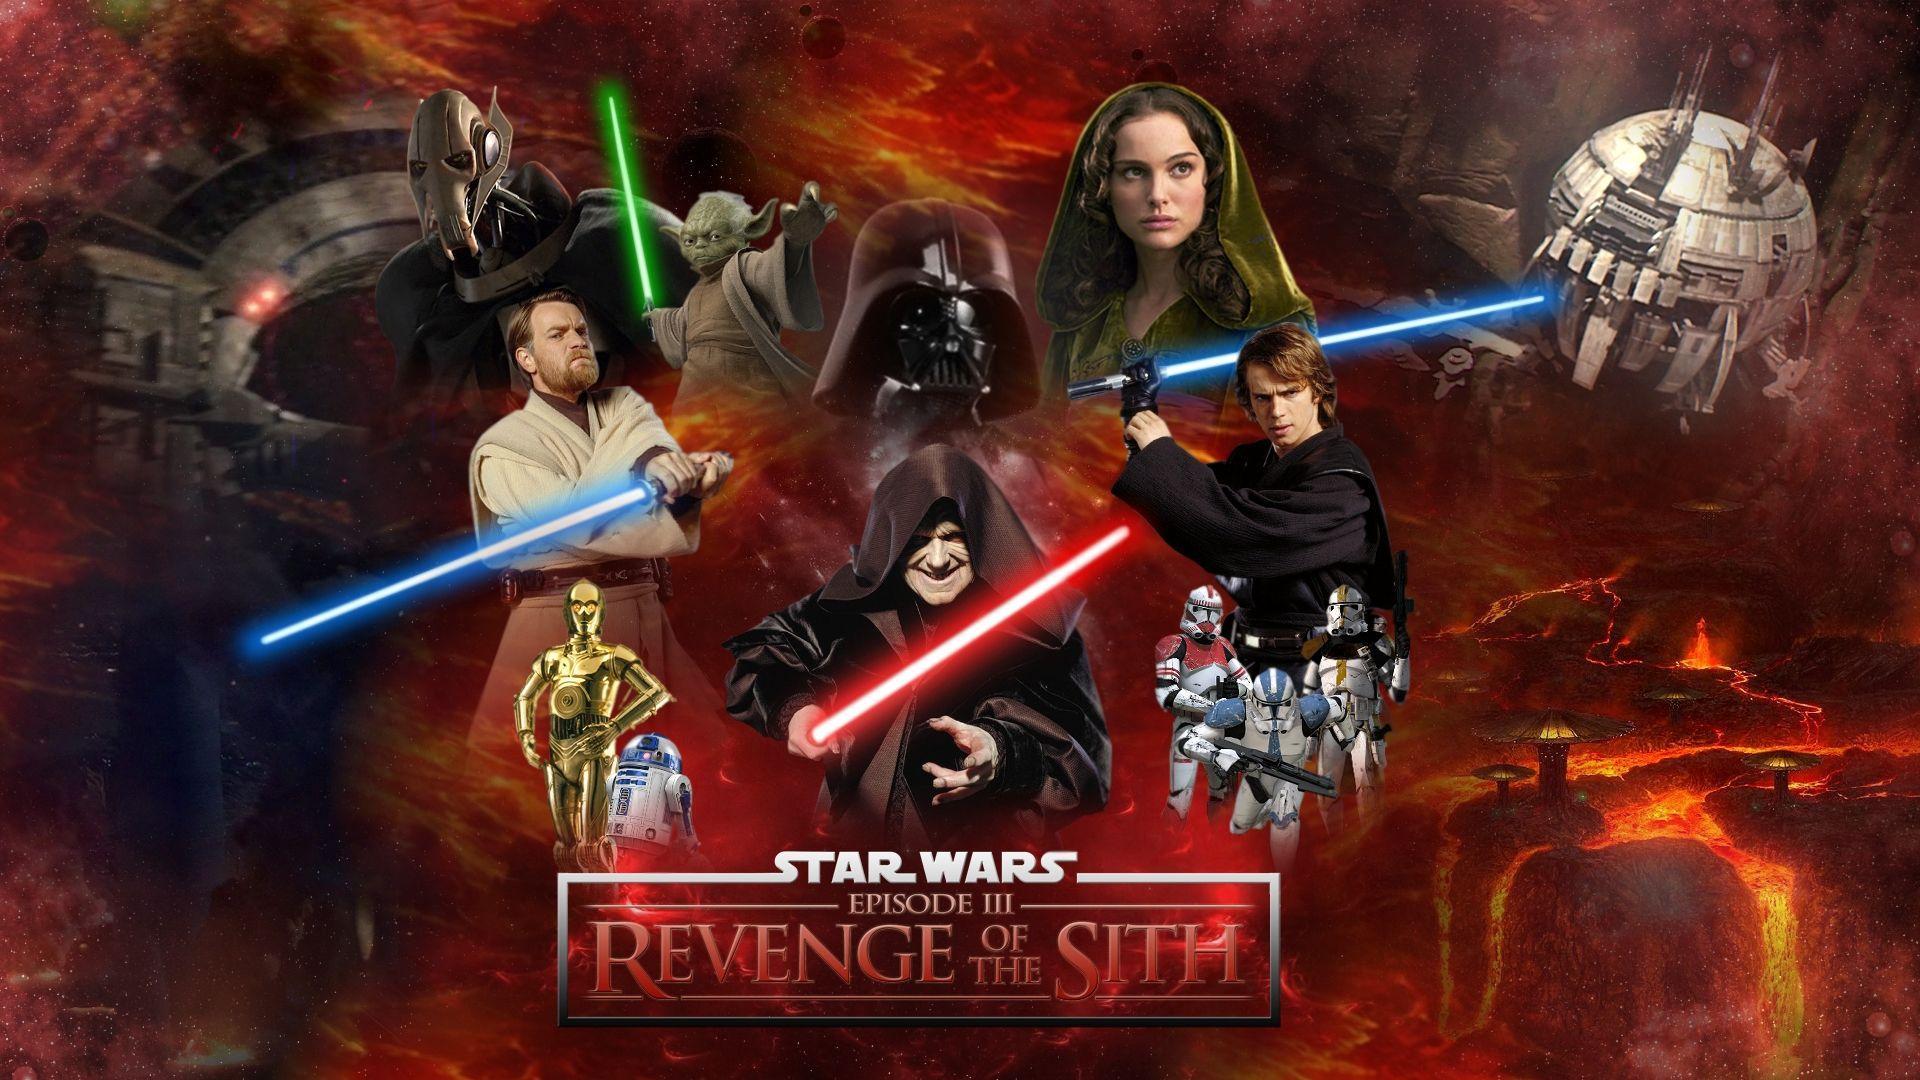 star-wars-revenge-of-the-sith-game-pc-download-millionairerts